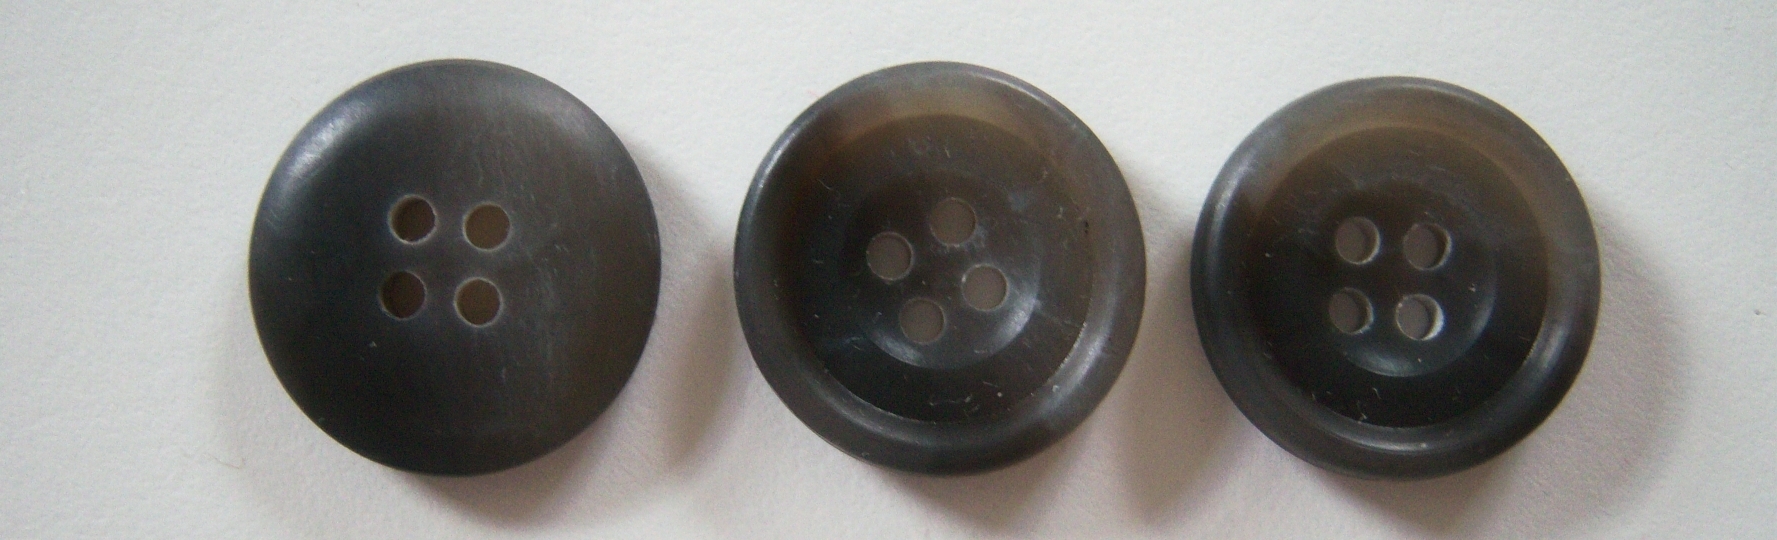 Grey/Charcoal 3/4" 4 Hole Button